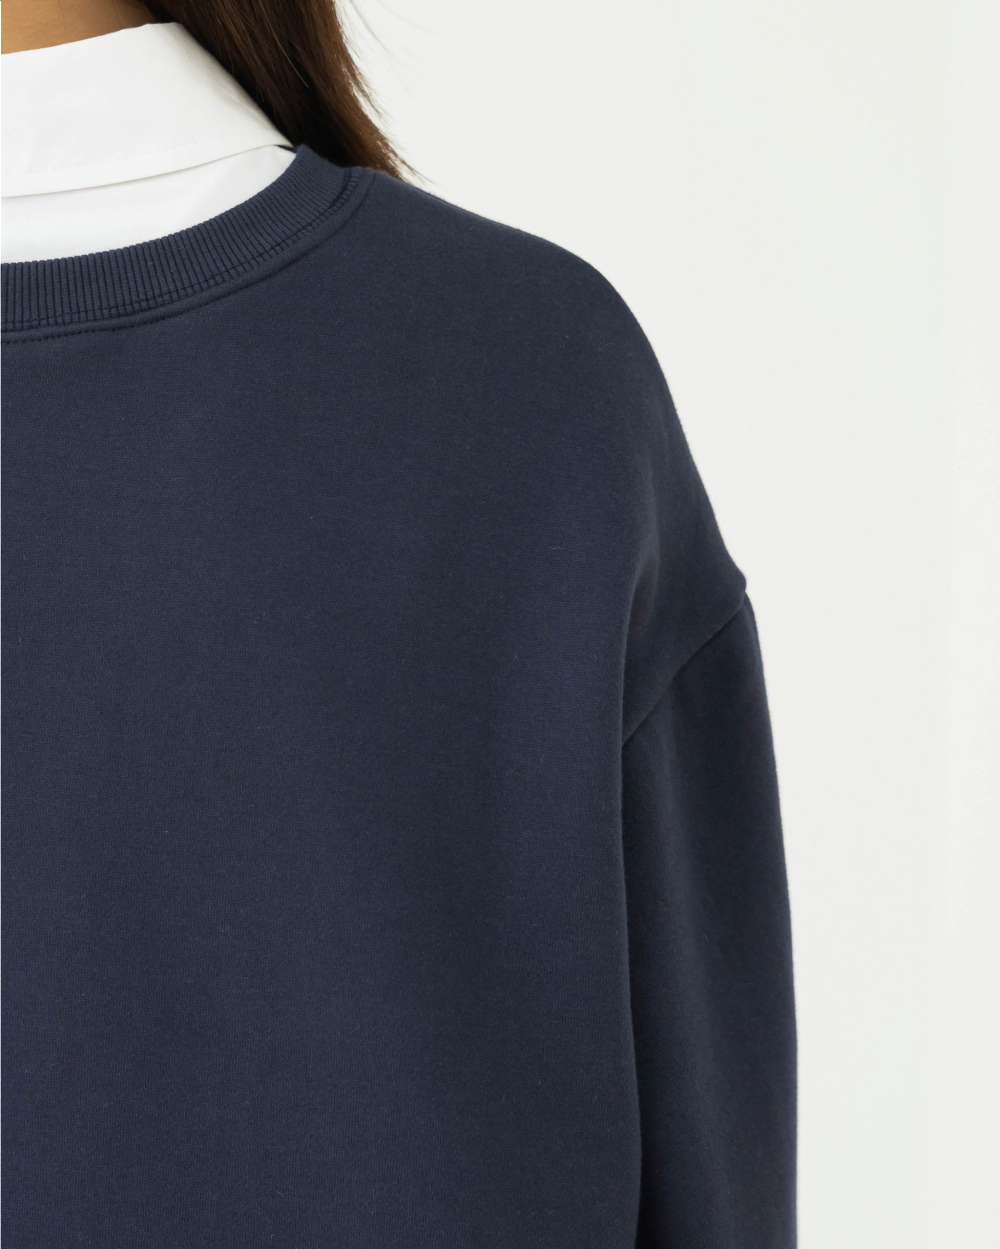 long sleeved tee detail image-S1L56